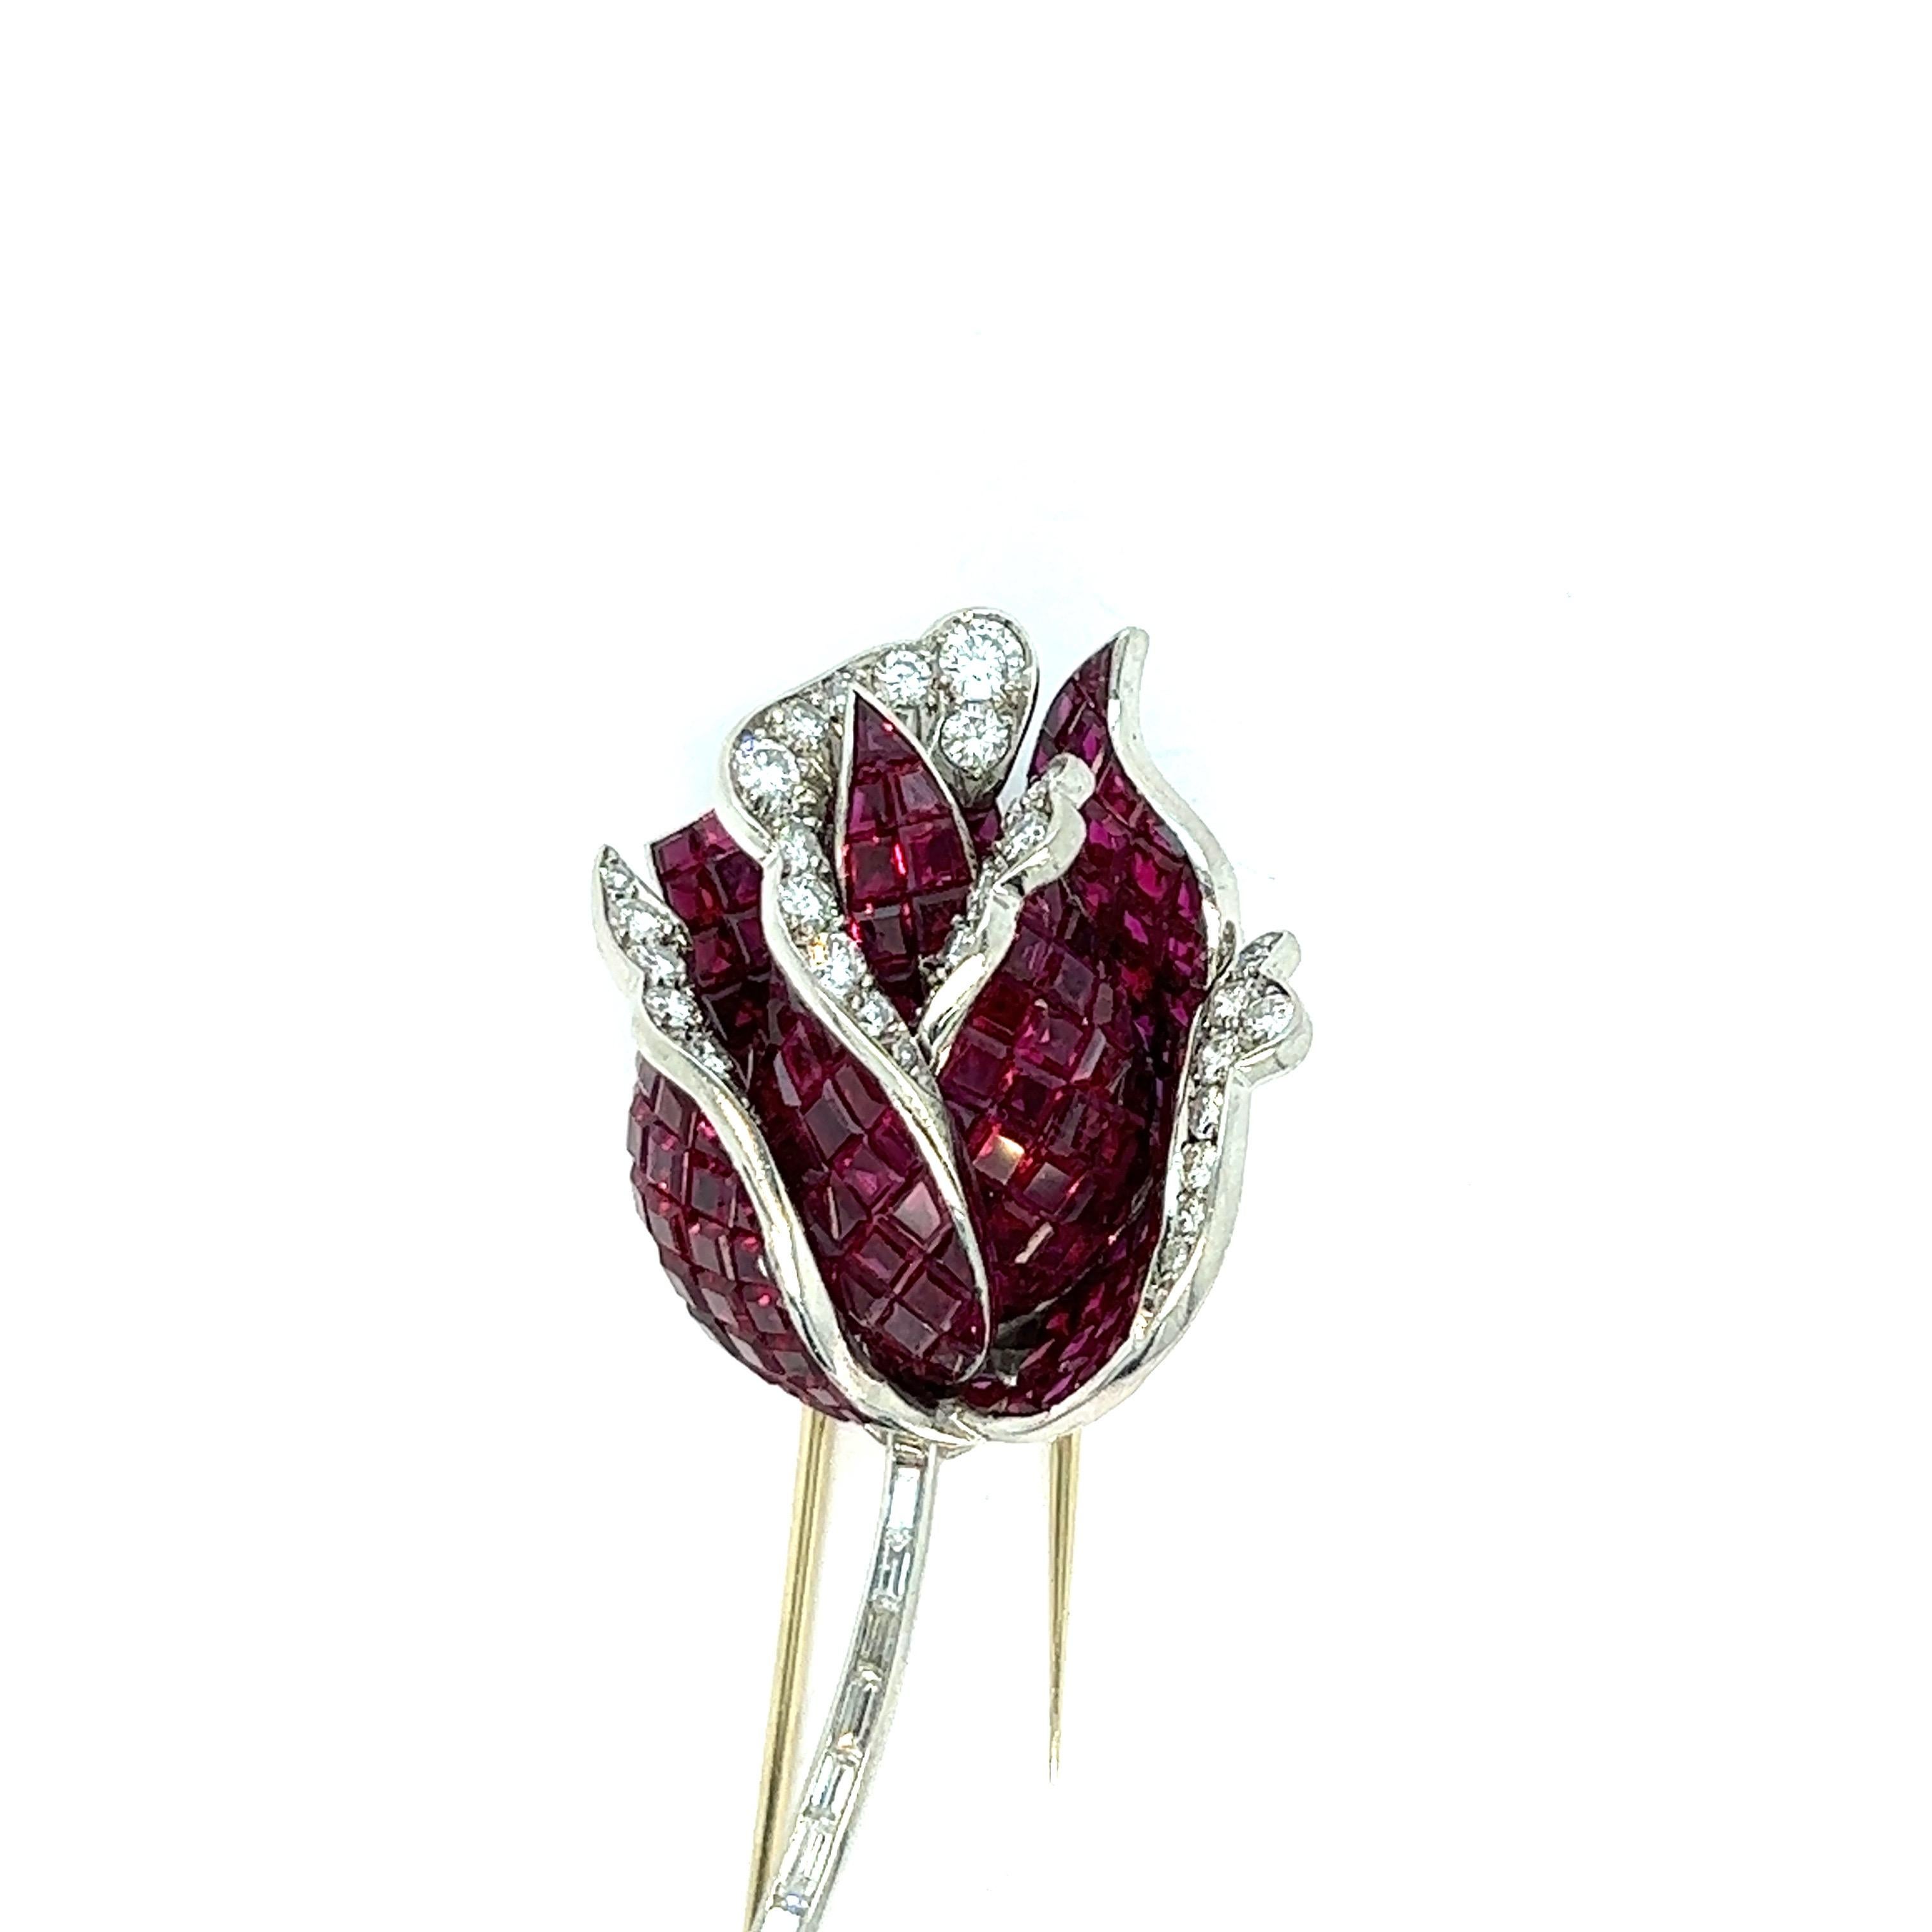 Ruby diamond rose brooch

1950s very high quality French brooch, featuring invisible rubies of approximately 35 carats and round- and baguette-cut diamonds of approximately 4.5 carats set in platinum; French maker's mark

Size: width 1.13 inches,